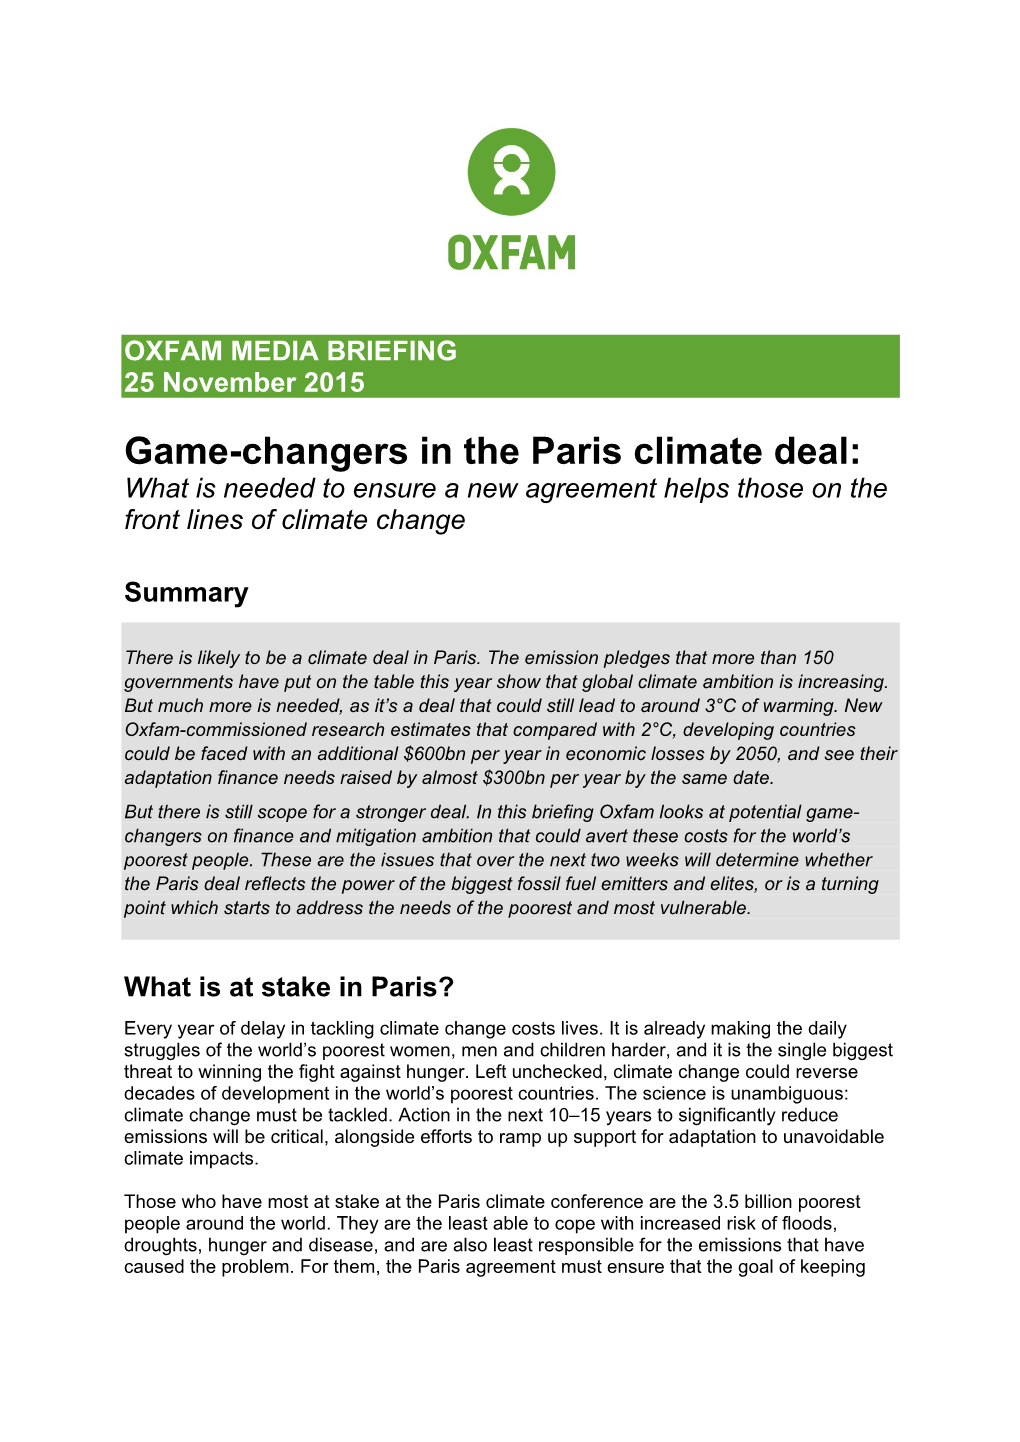 Game-Changers in the Paris Climate Deal: What Is Needed to Ensure a New Agreement Helps Those on the Front Lines of Climate Change